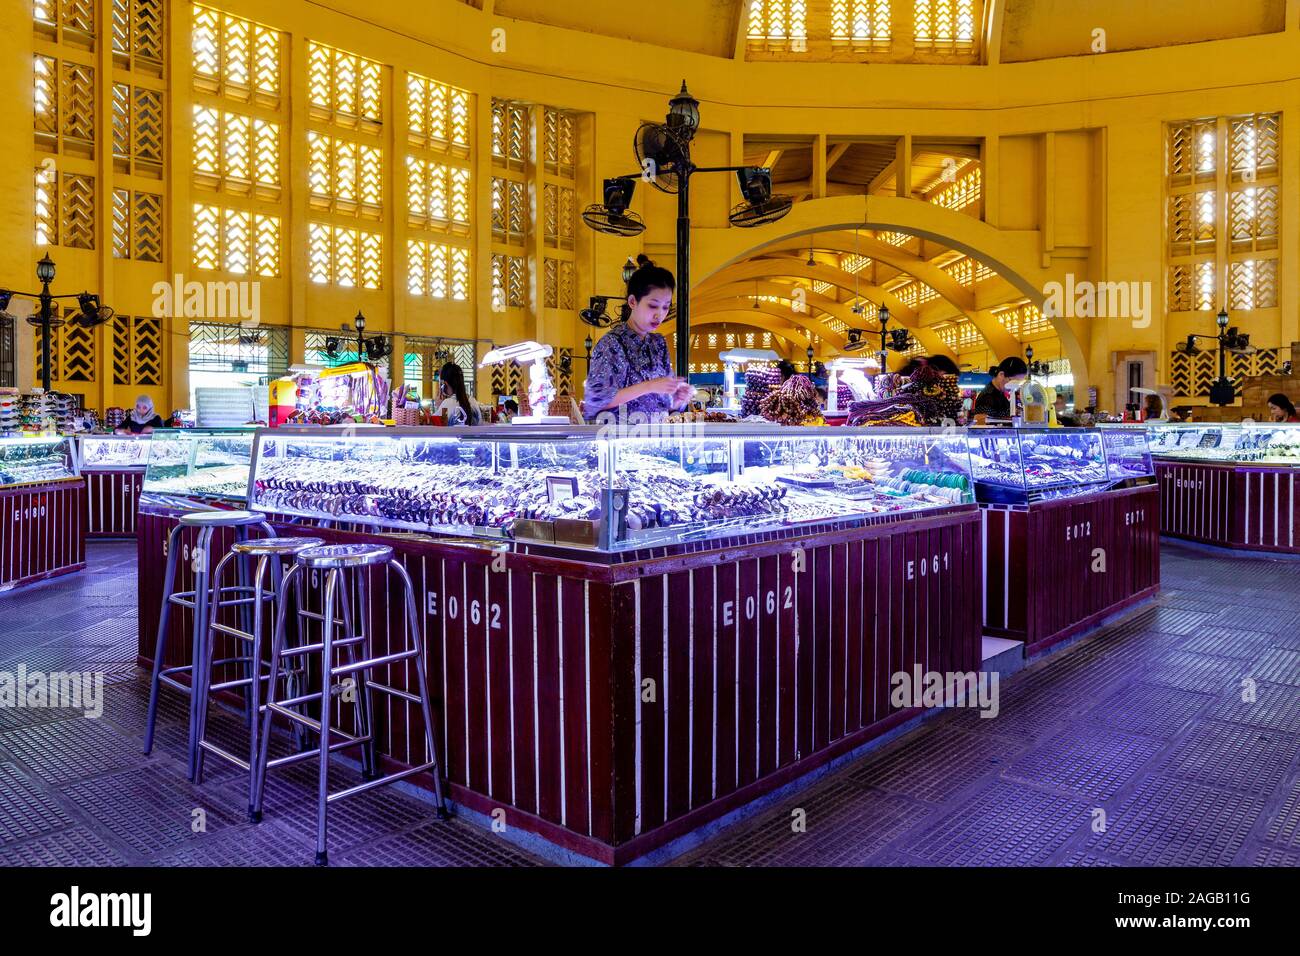 A Young Woman Selling Watches and Jewellery At The Central Market, Phnom Penh, Cambodia. Stock Photo